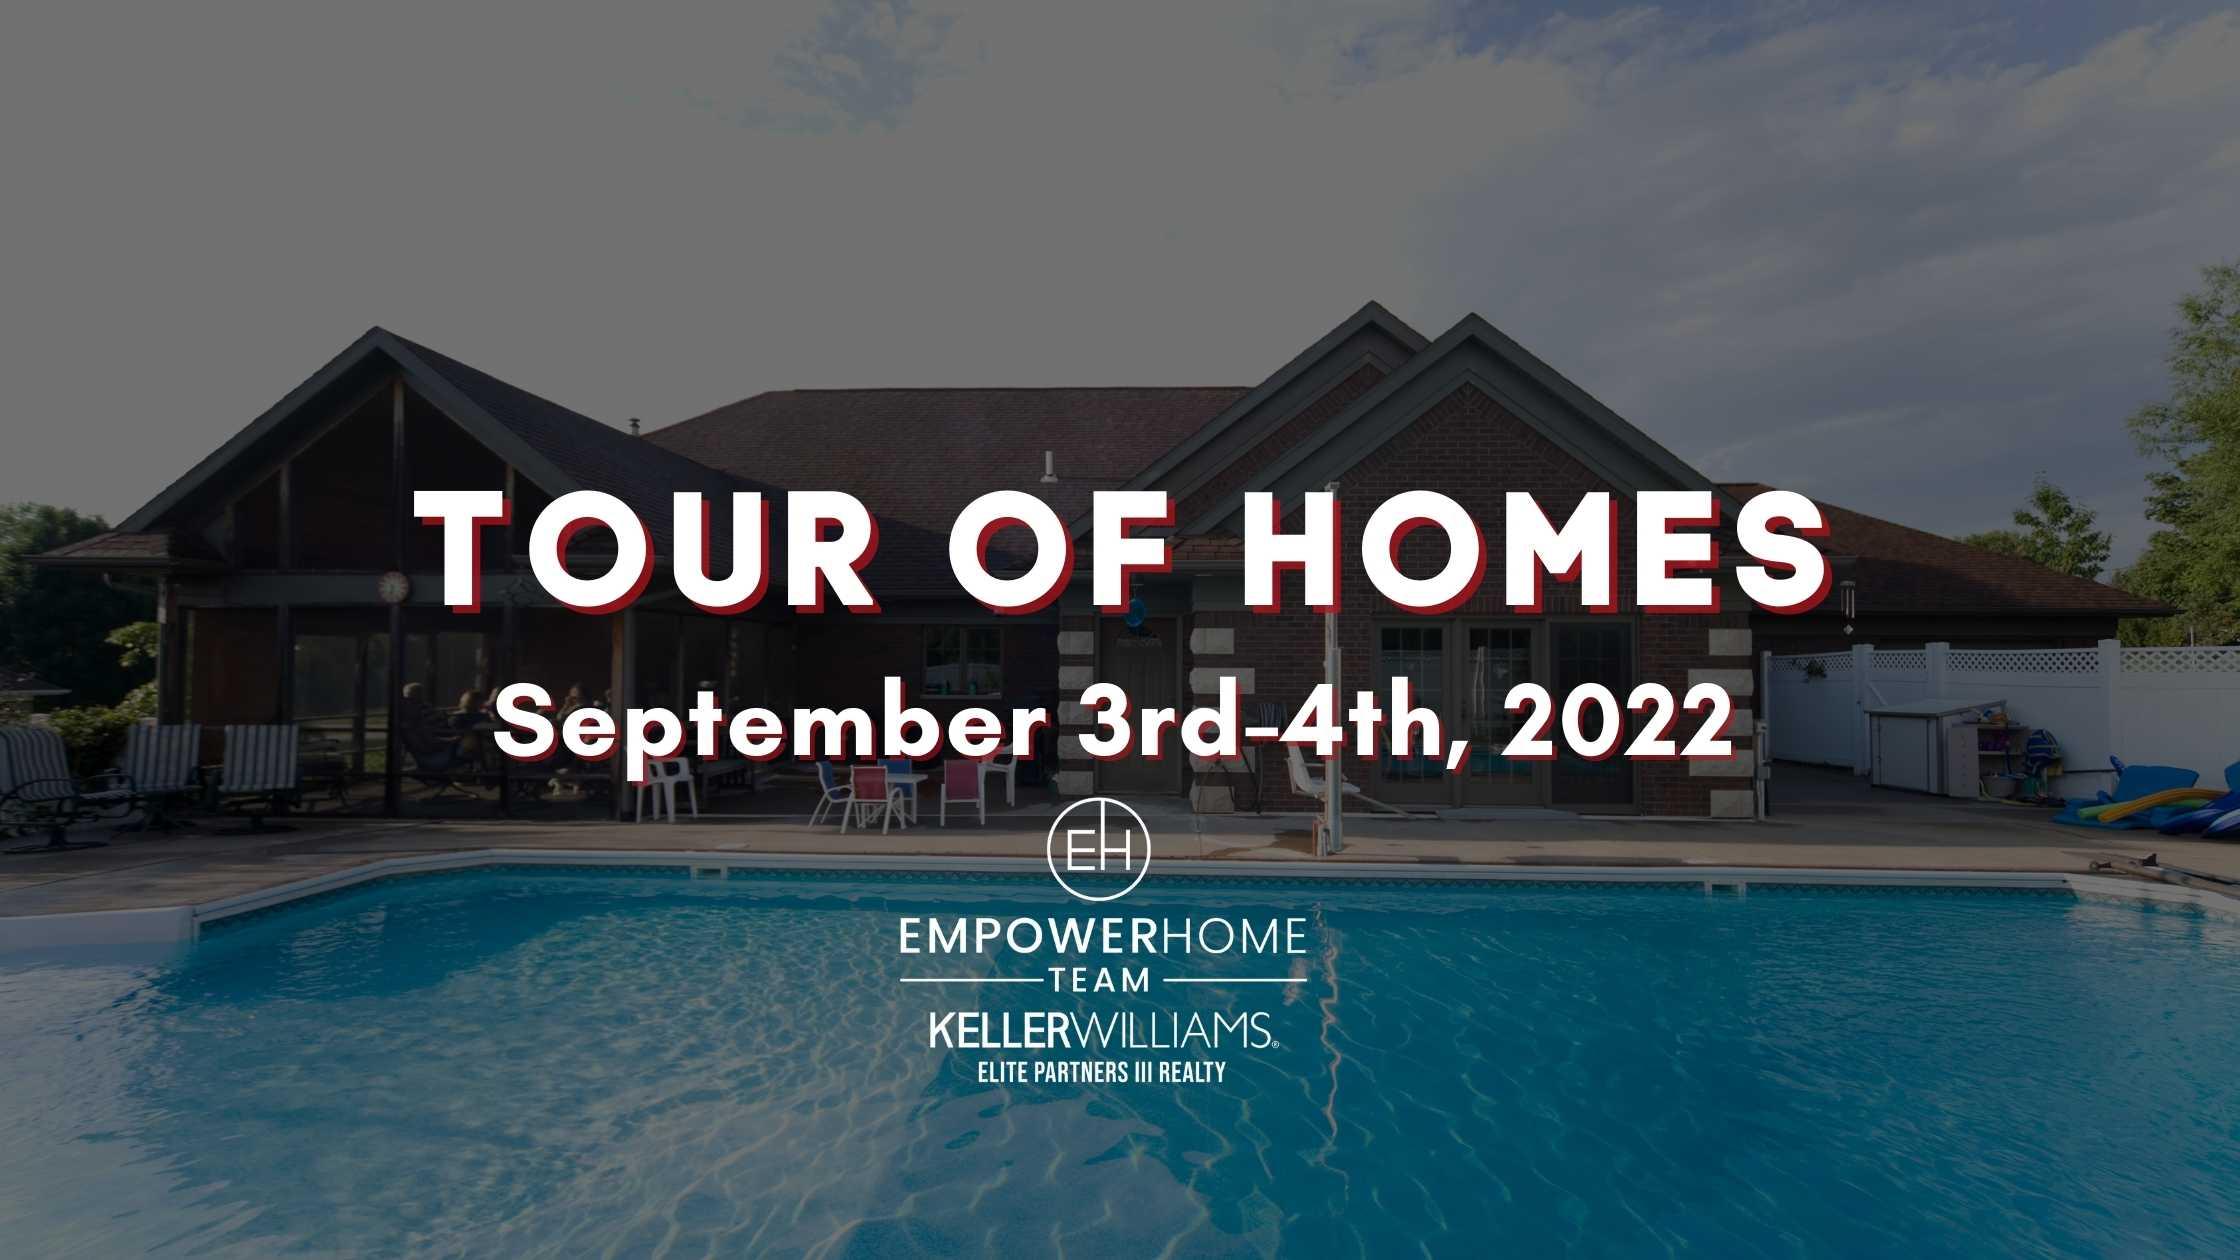 Orlando Tour of Homes In-Person September 3rd-4th